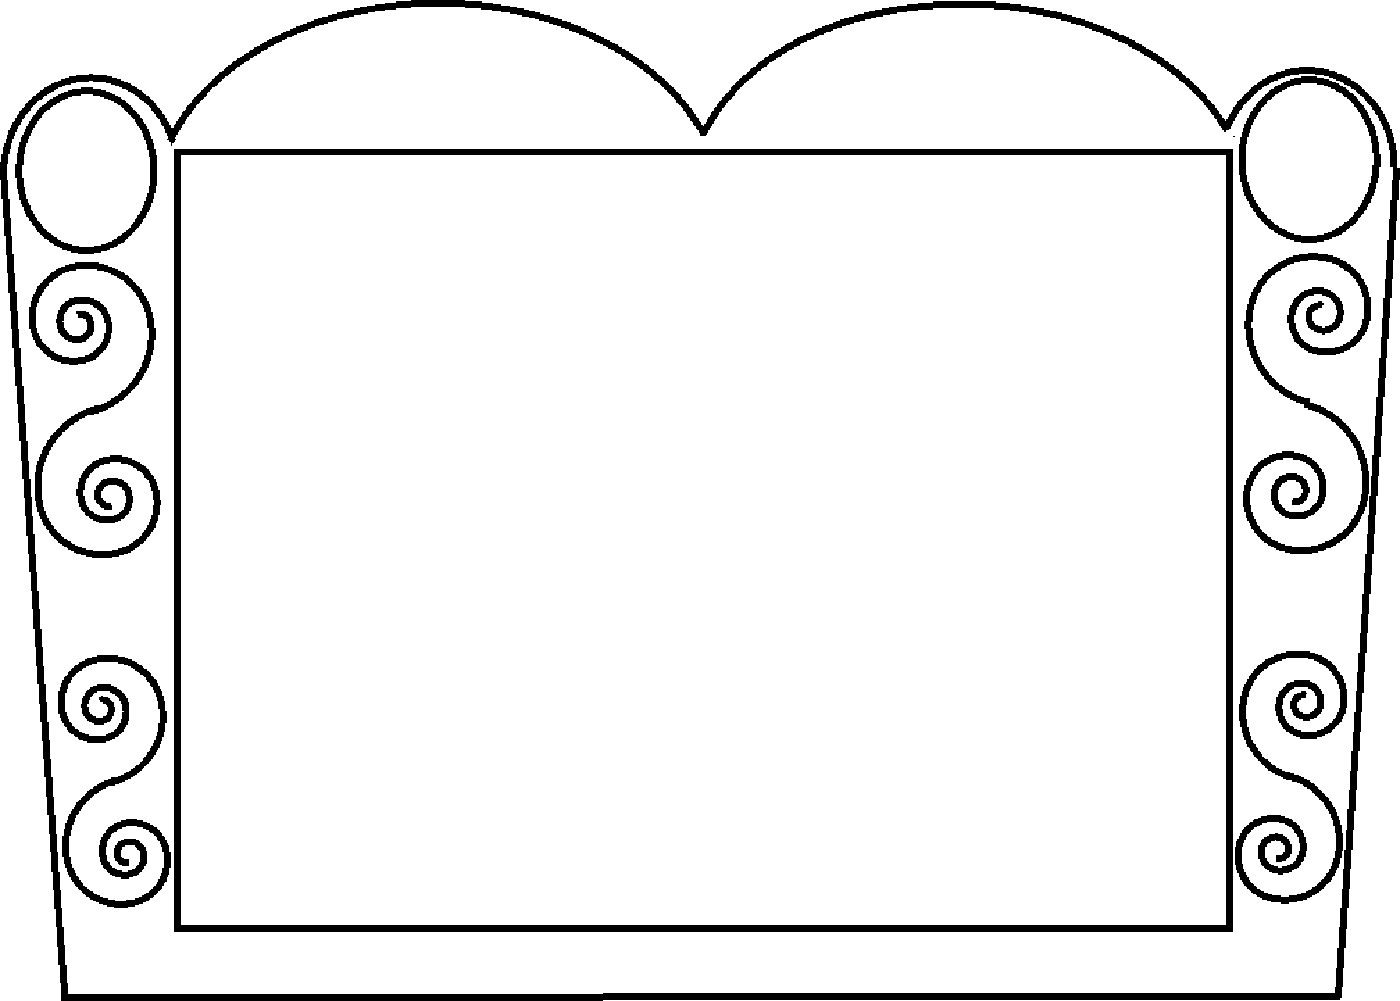 Free Tombstone Template Printable, Download Free Tombstone Template